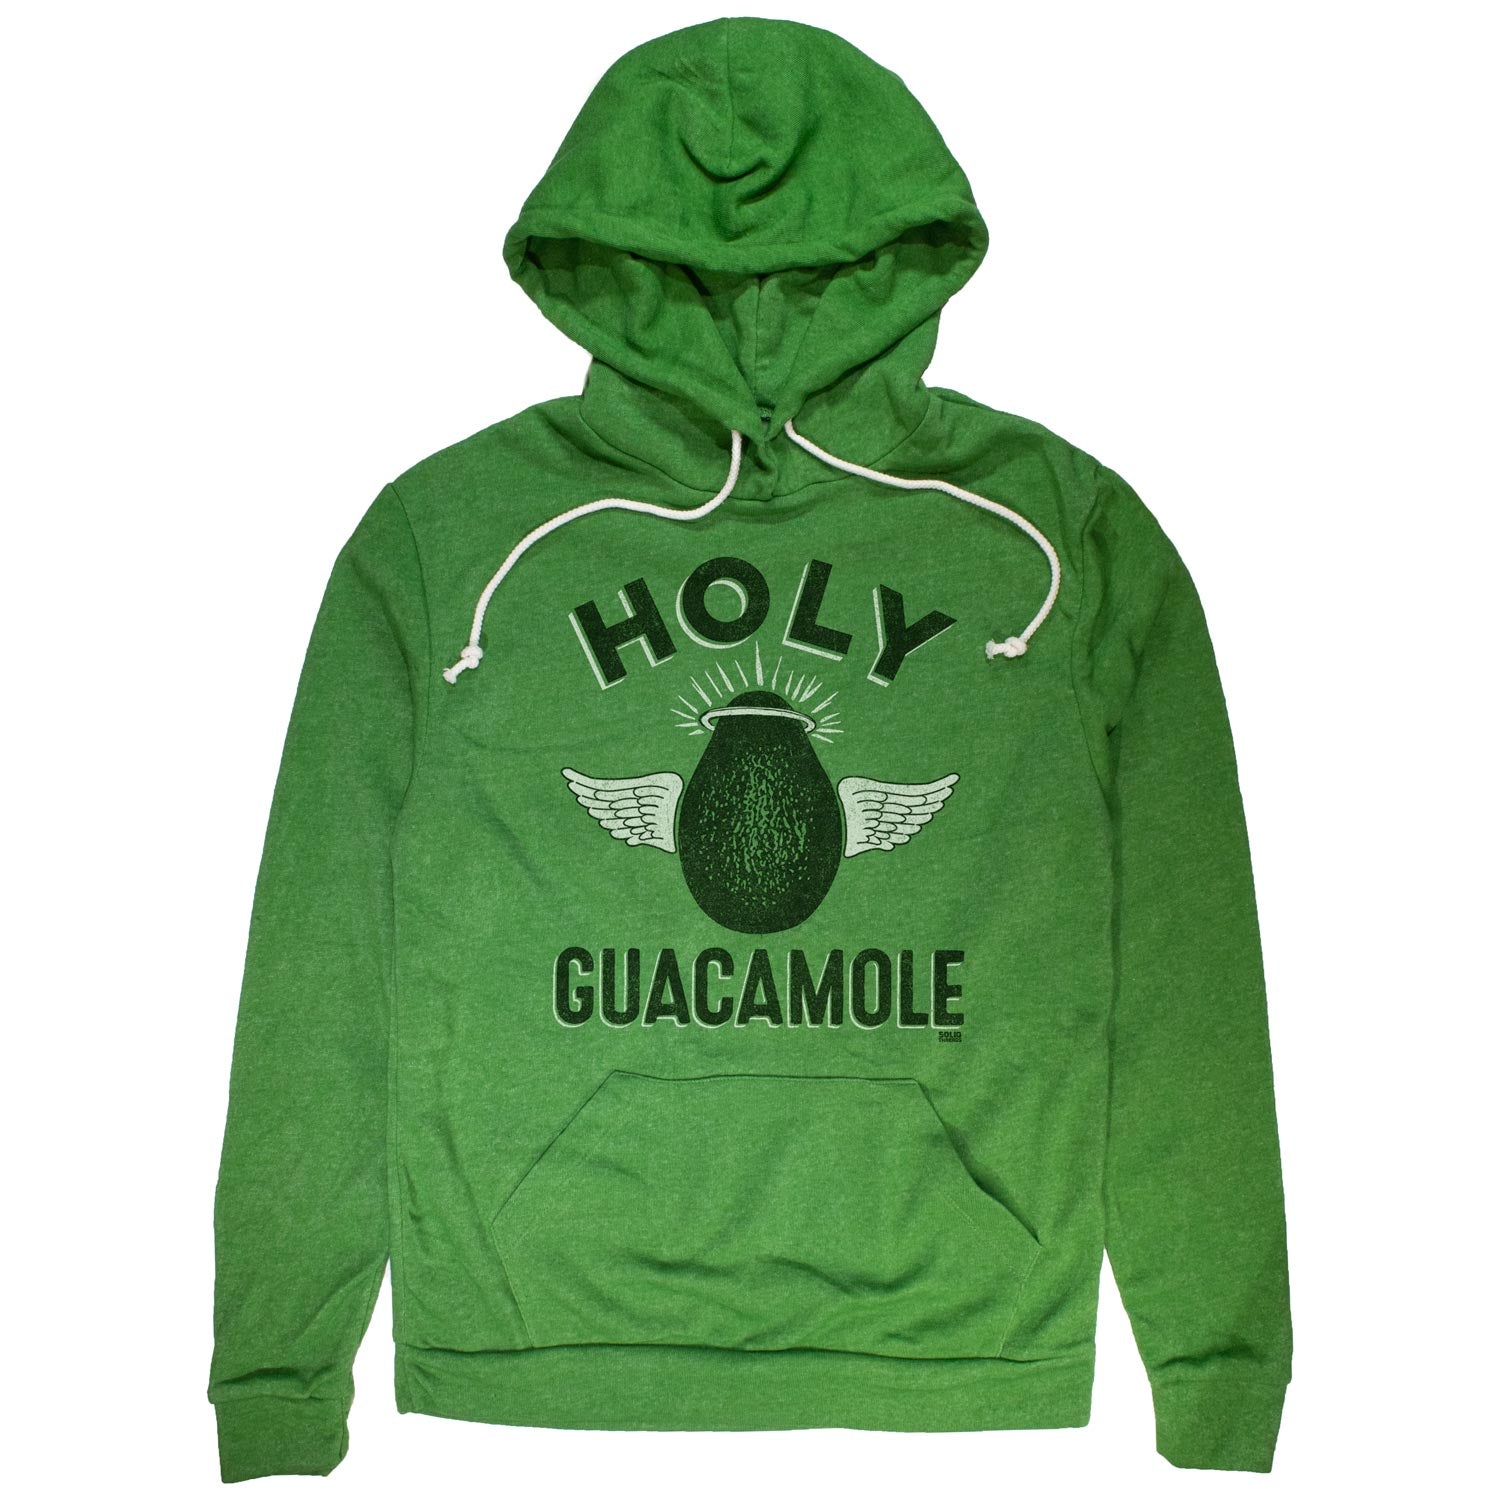 Holy Guacamole Vintage Pullover Hoodie | Funny Avocado Graphic | Solid Threads